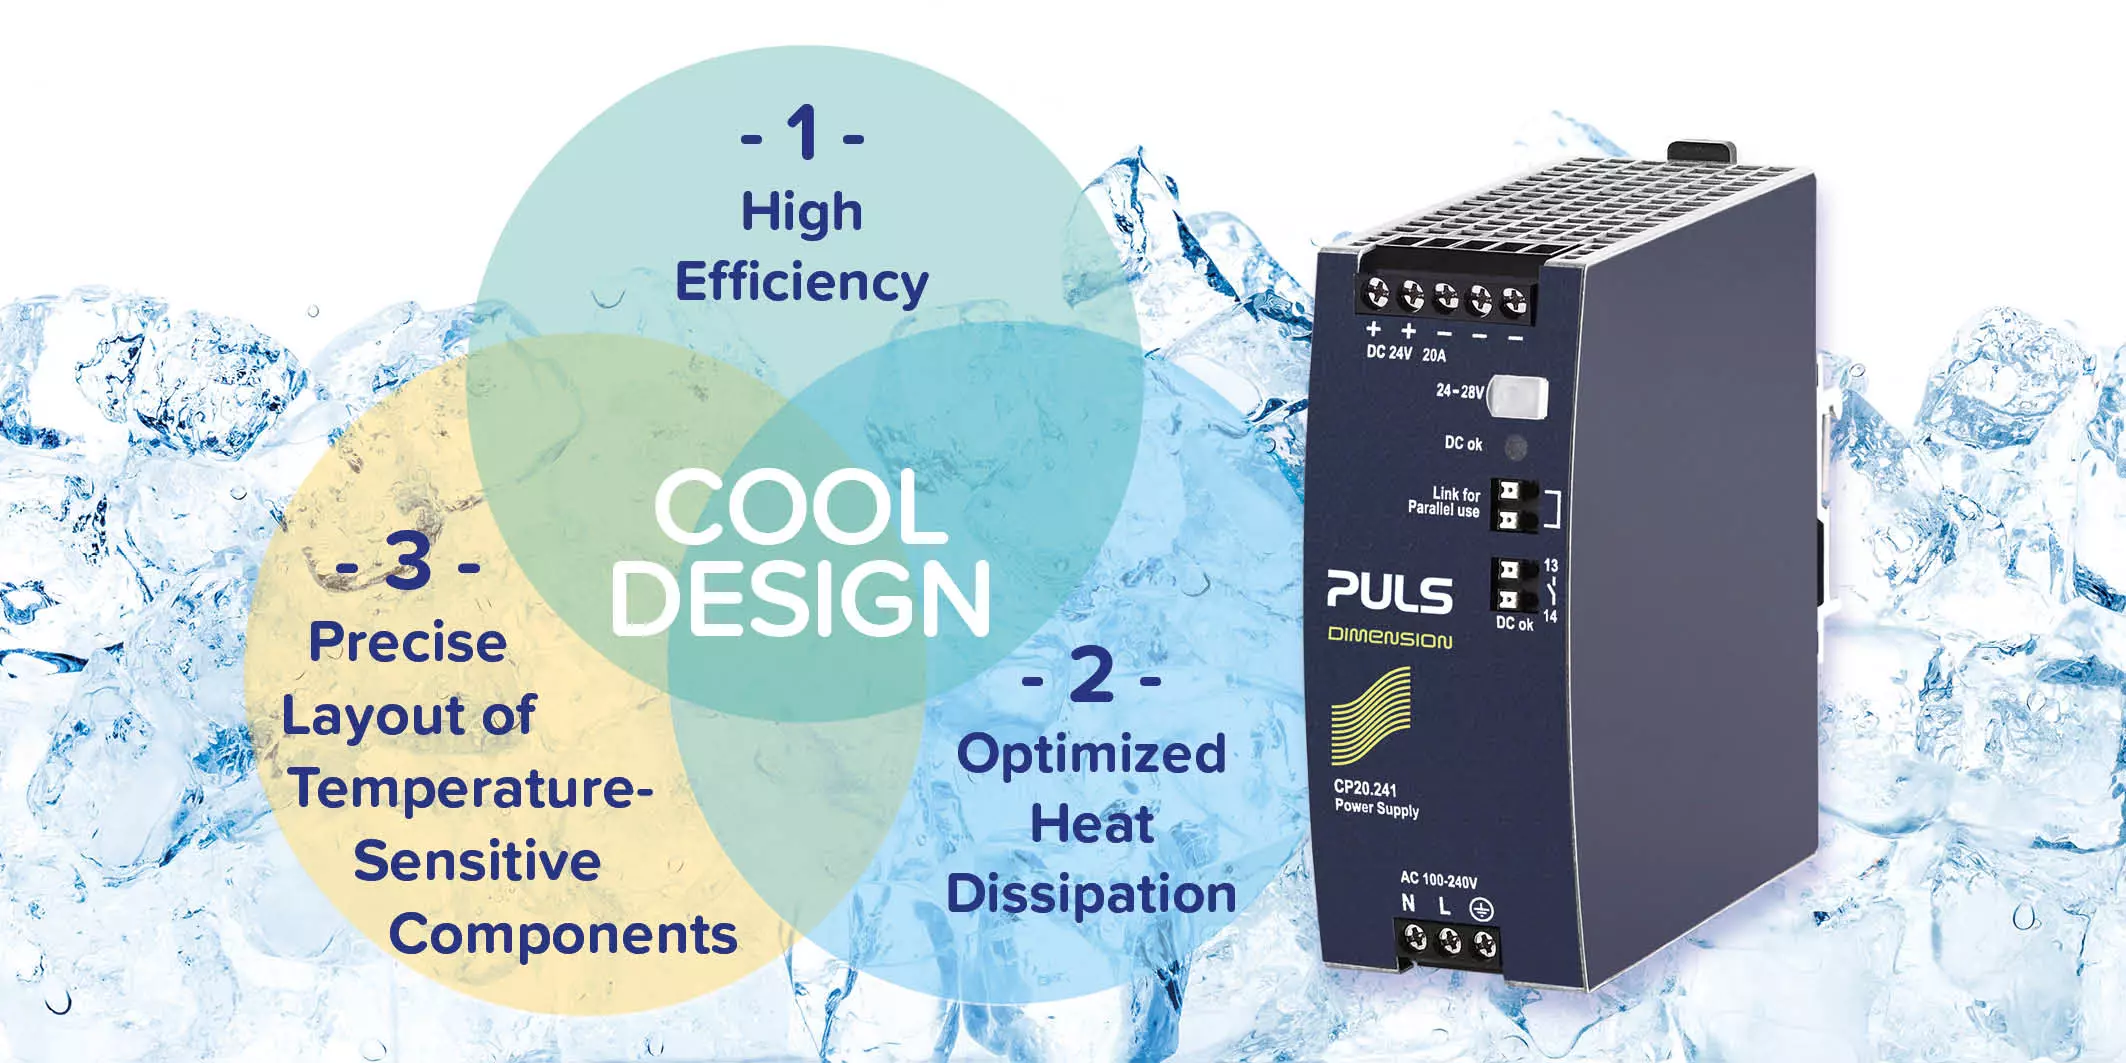 DIN rail power supply units: How the service lifetime is determined by the temperatureDIN rail power supply units: How the service lifetime is determined by the temperature